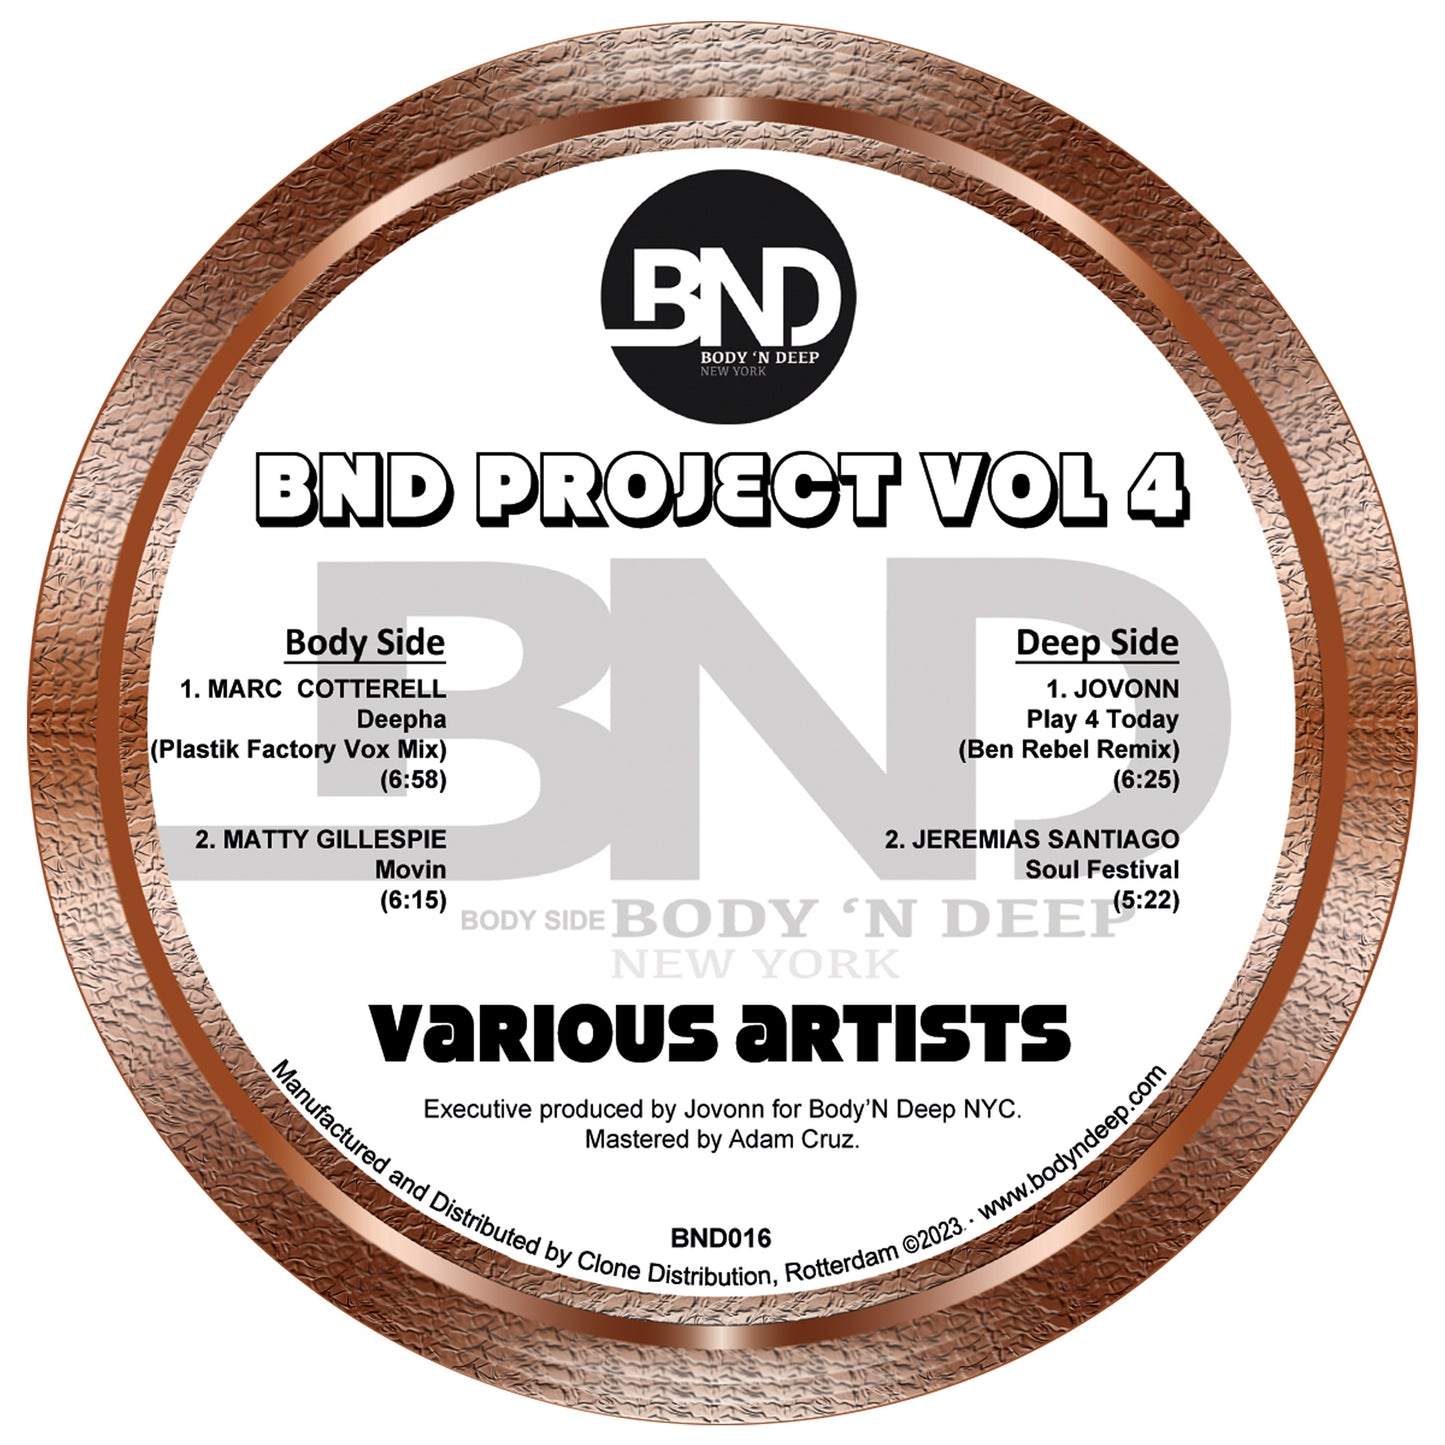 BND Projects Vol 4